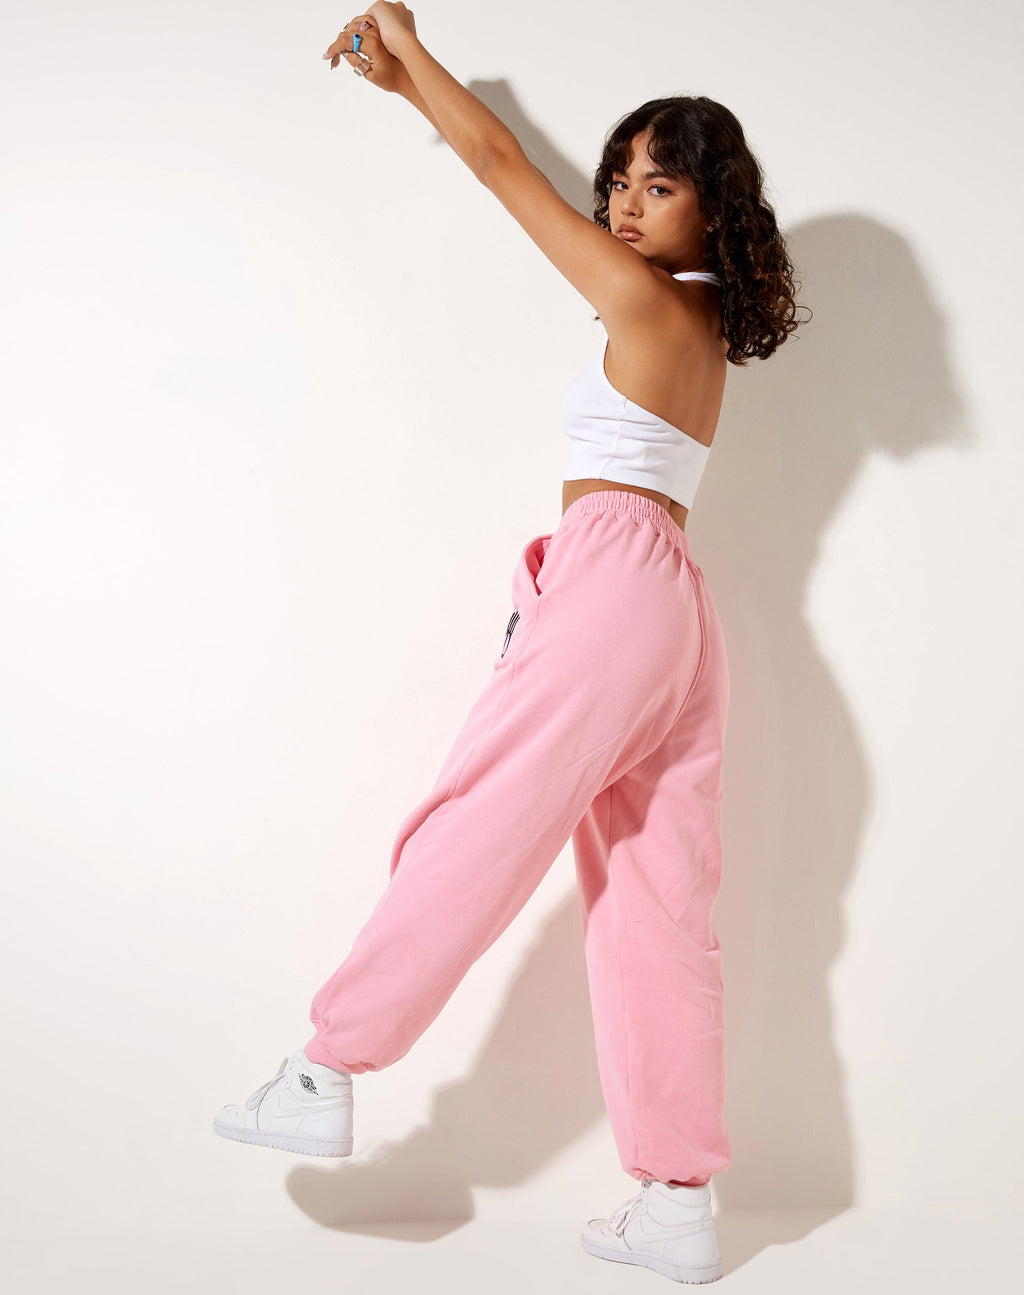 Roider Jogger in Peony Pink Nothing Personal